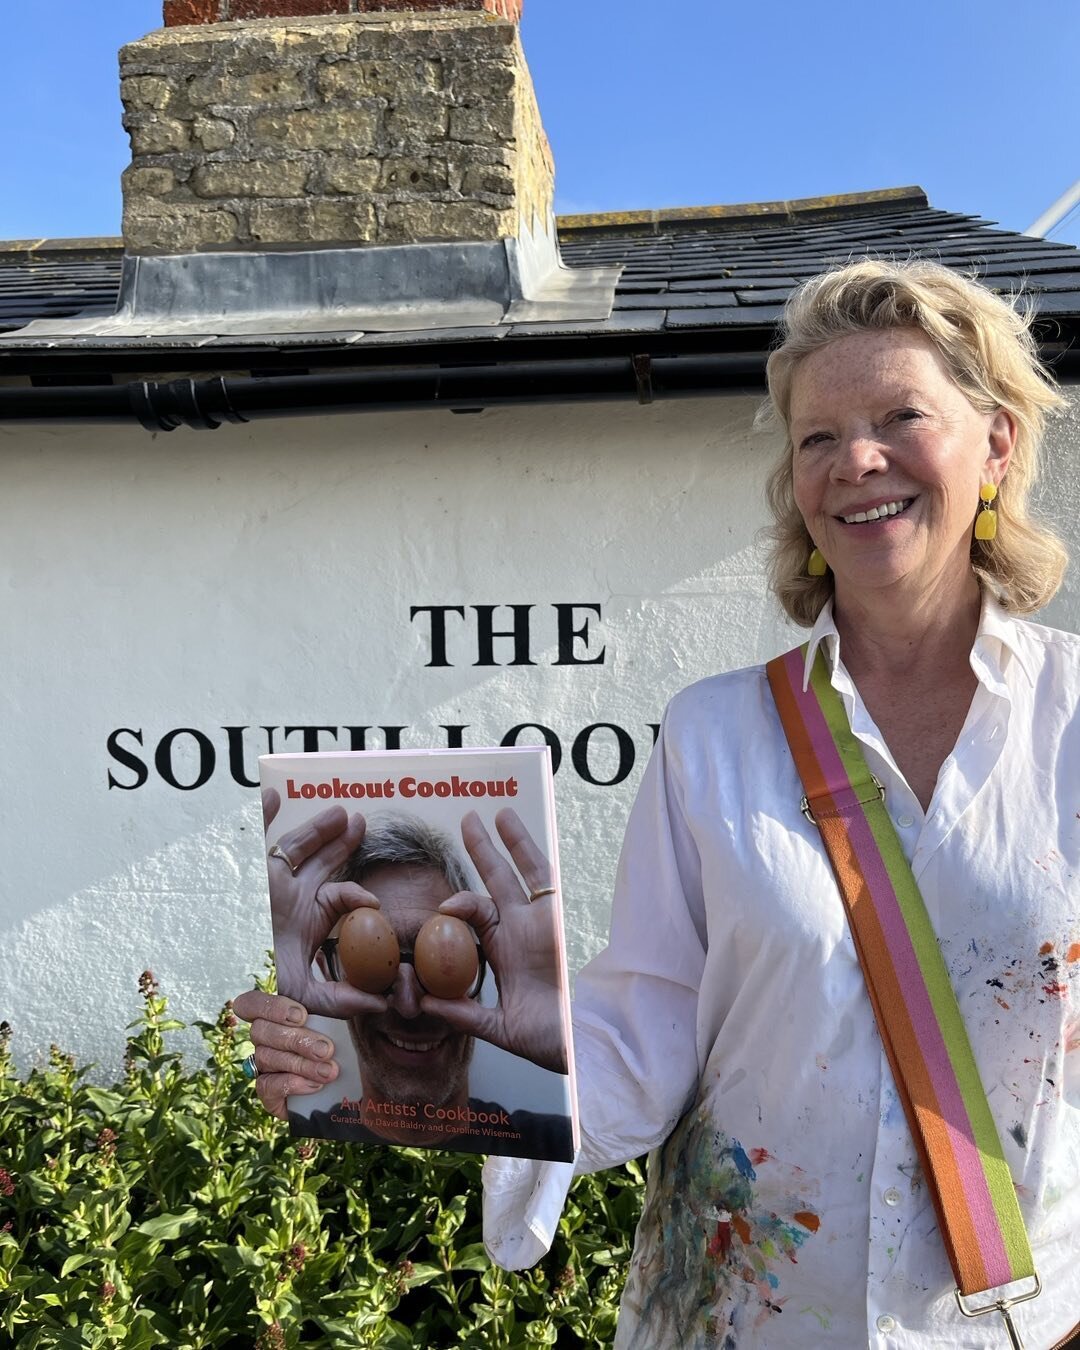 Meet Sarah Muir Poland this sunny morning at the Aldeburgh Beach Lookout as she cooks her Lookout Cookout recipe for us all to taste: Porridge the  Scottish Way 9.30 - 11.30am. Lots of delicious porridge to eat and fizz to drink! All welcome. See you